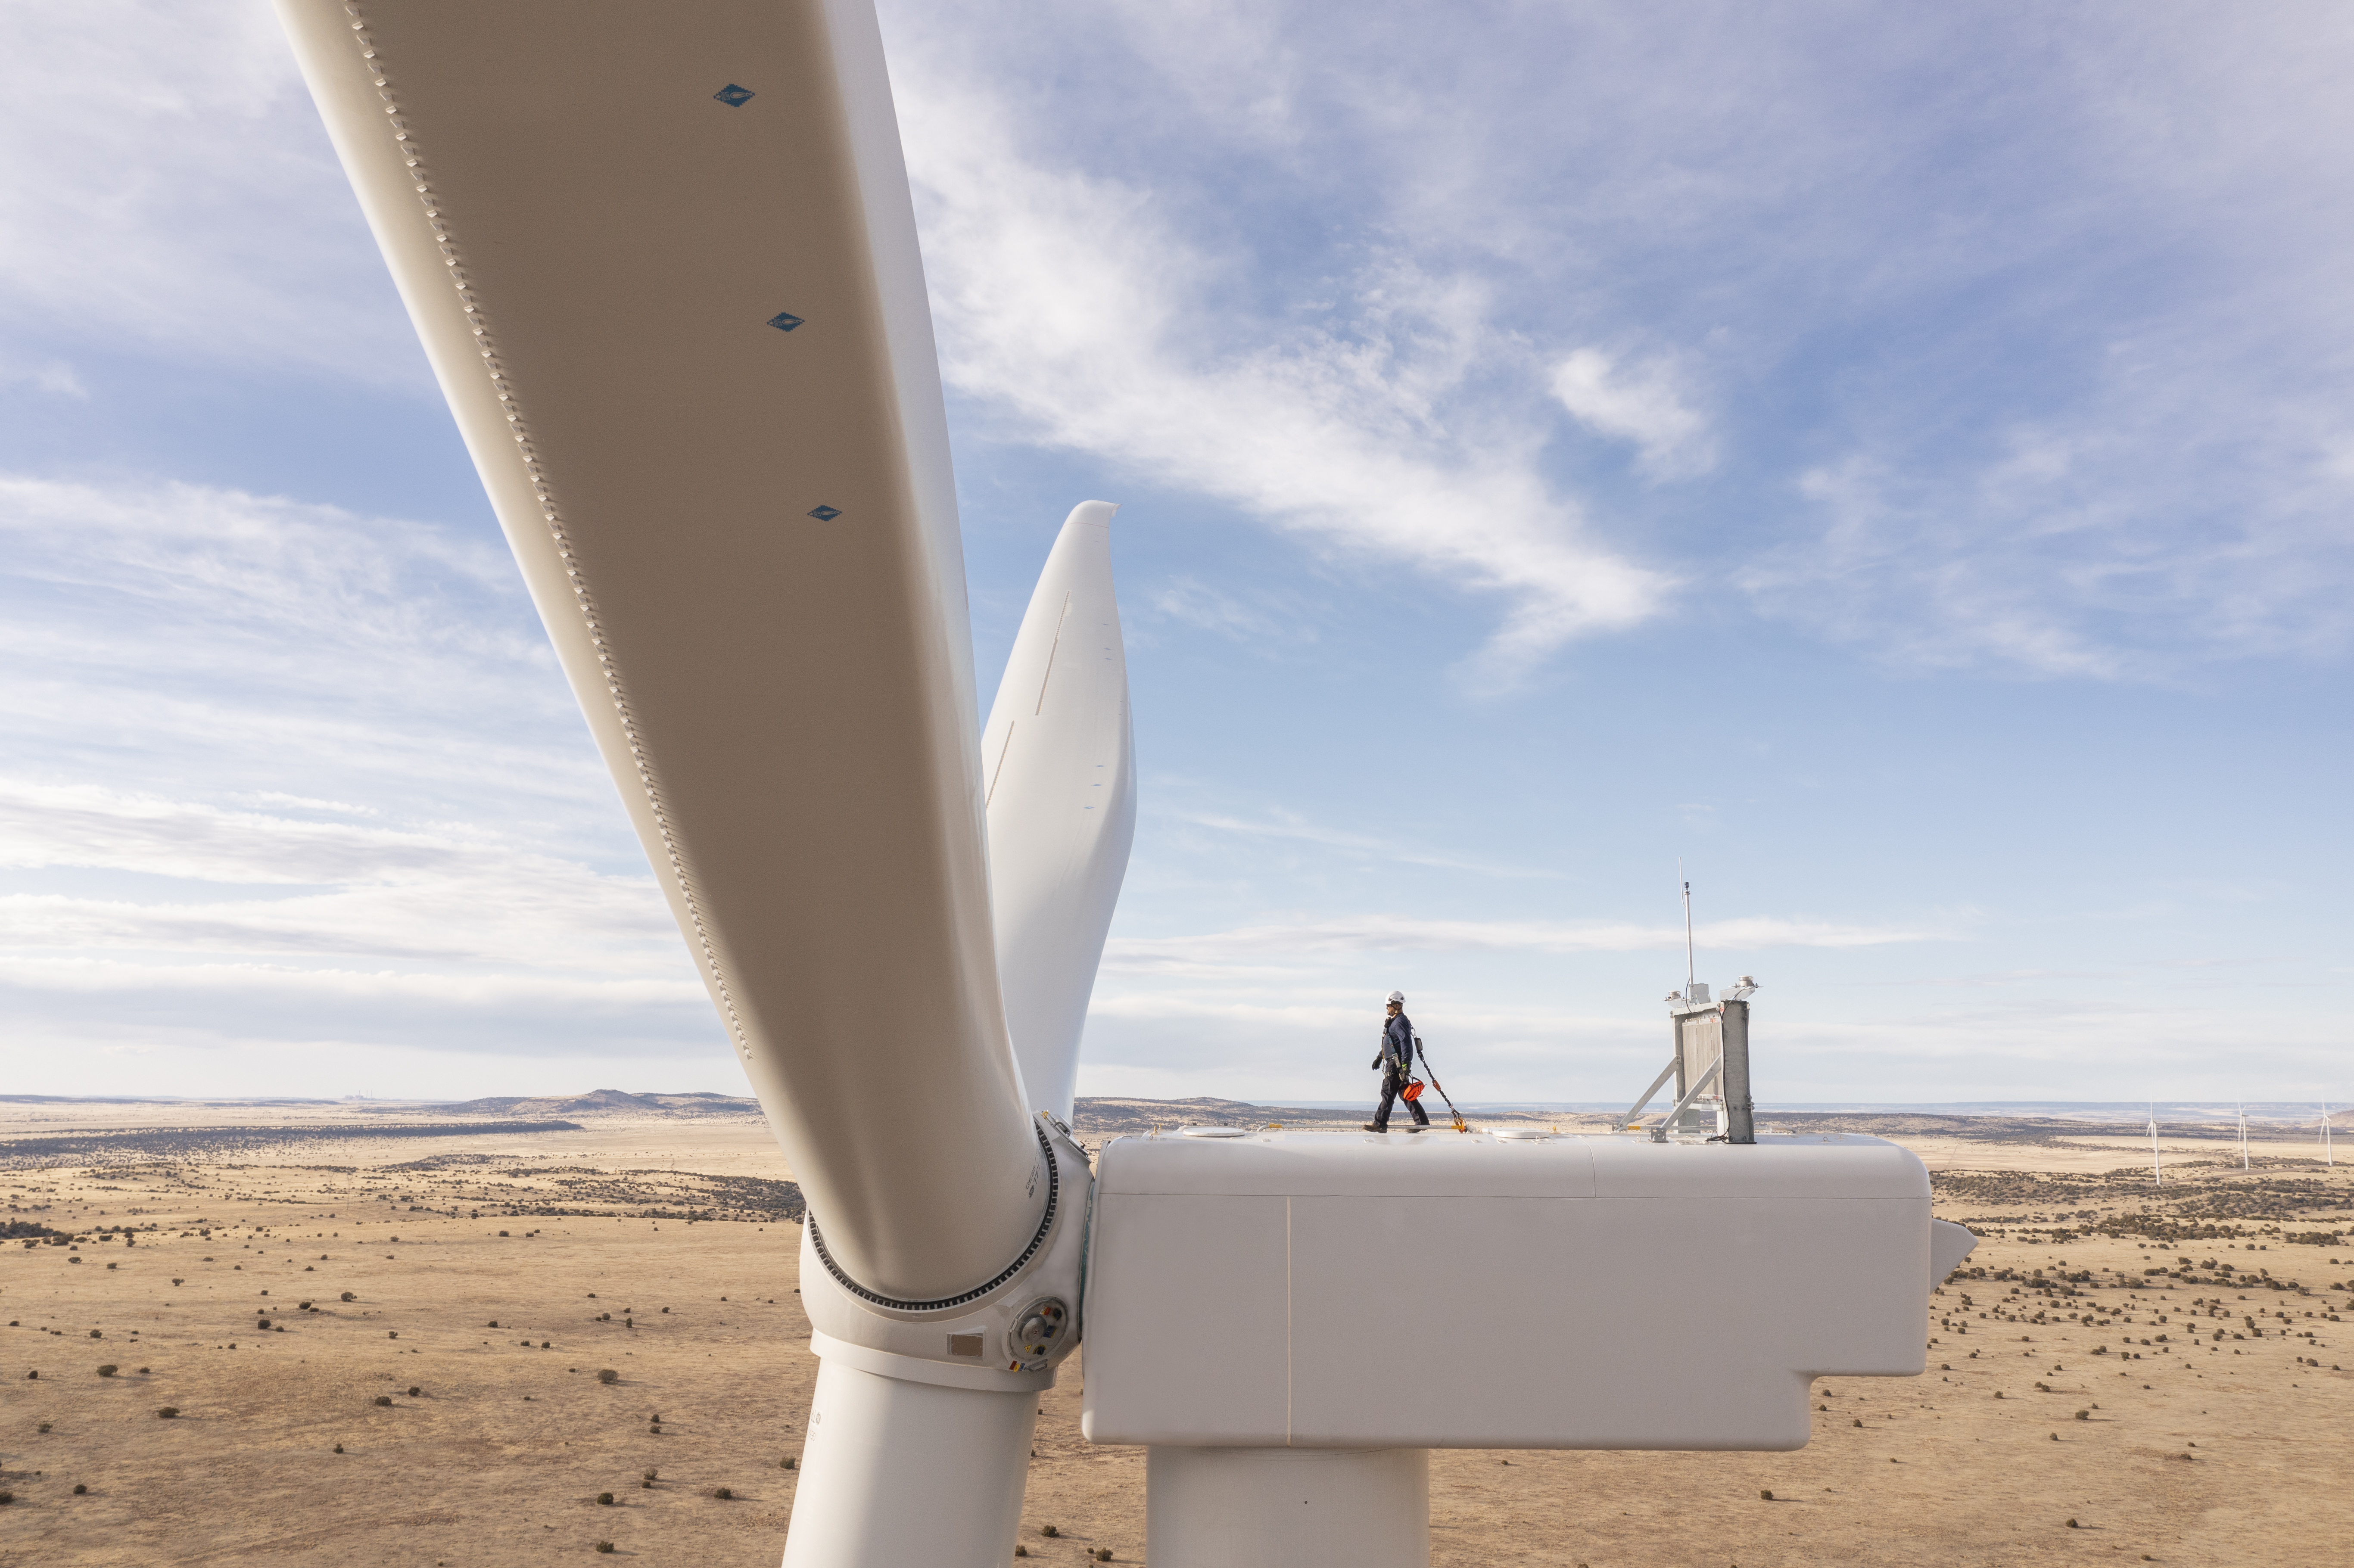 Major Deal: GE Vernova Lands 2.4 GW Order for SunZia Wind Project by Pattern Energy